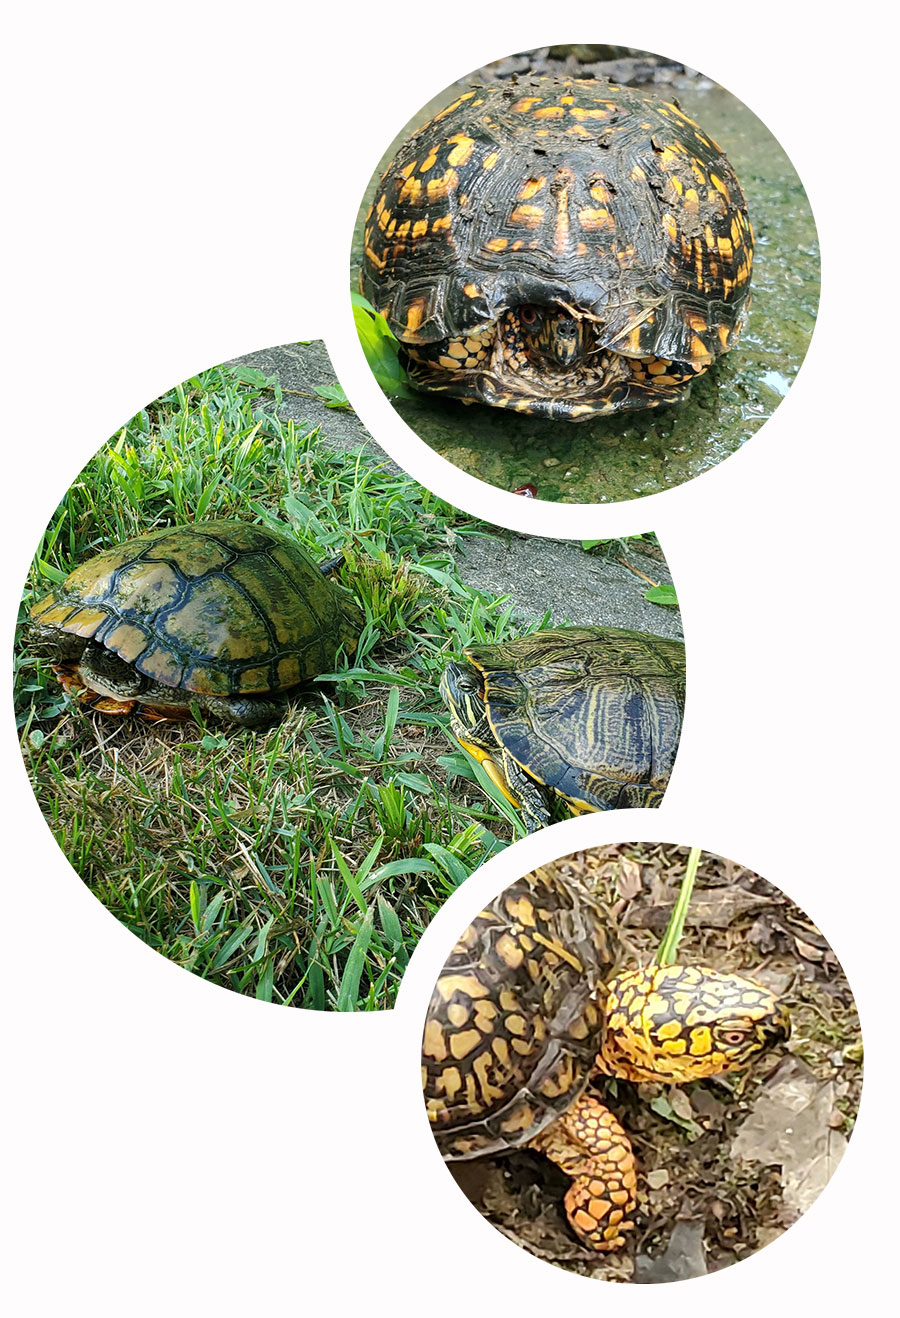 collage of turtles, box turtle inside shell, only one eye visible, two red-eared sliders hanging out on the grass, one box turtle with very yellow spots and head fully extended